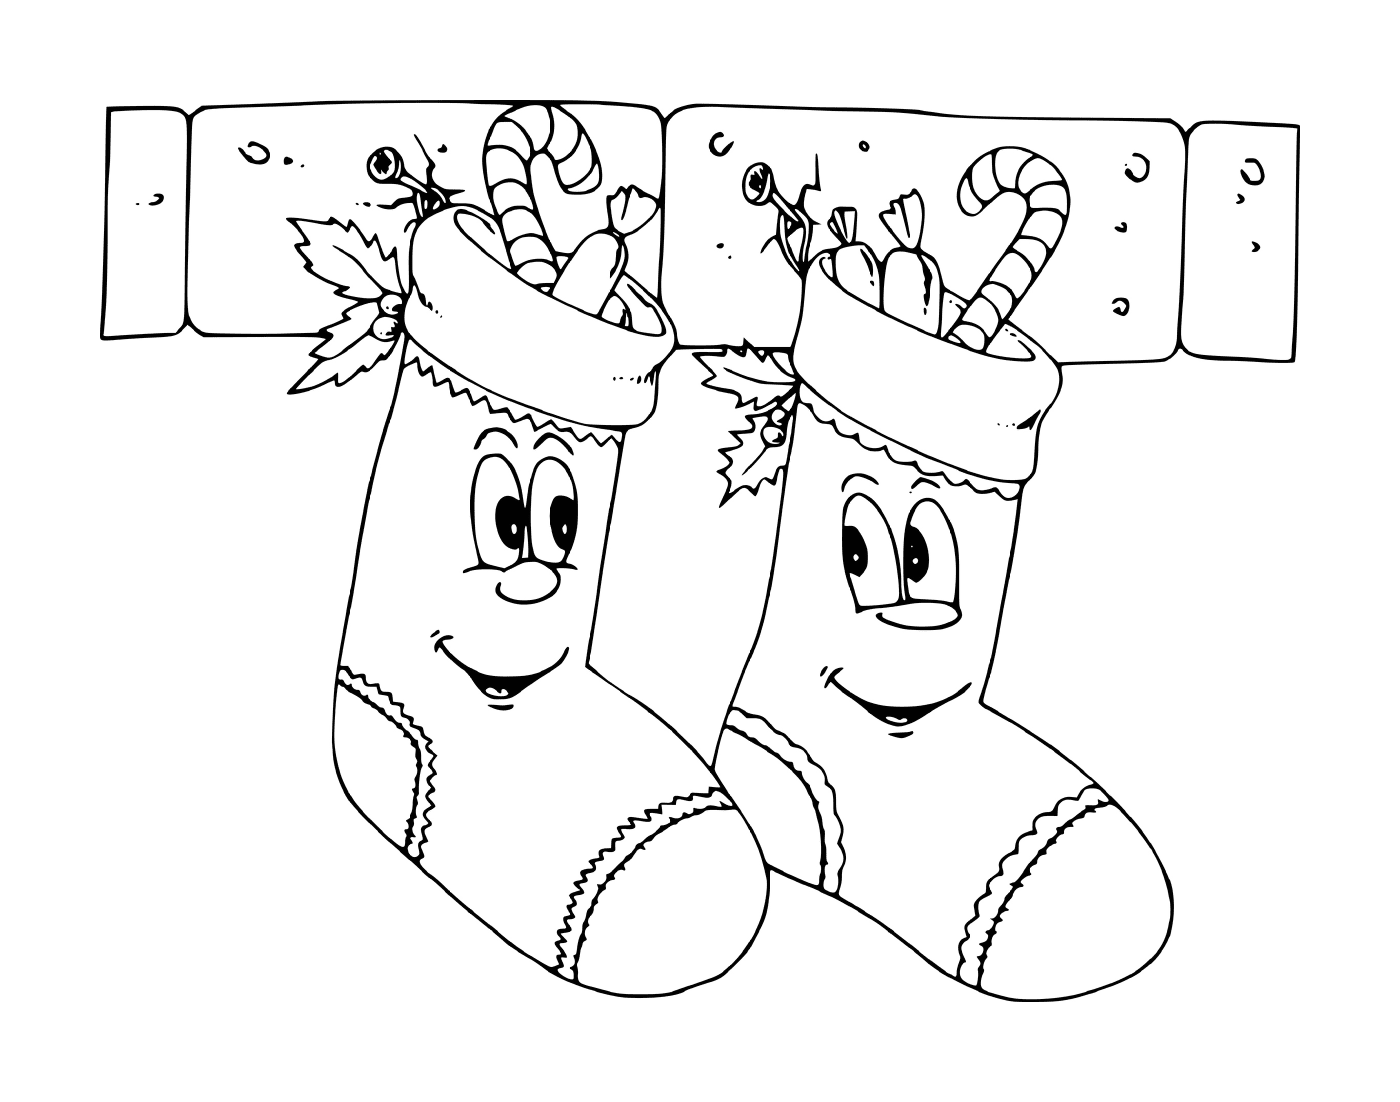  Two Christmas stockings with a smile on a fireplace coat 